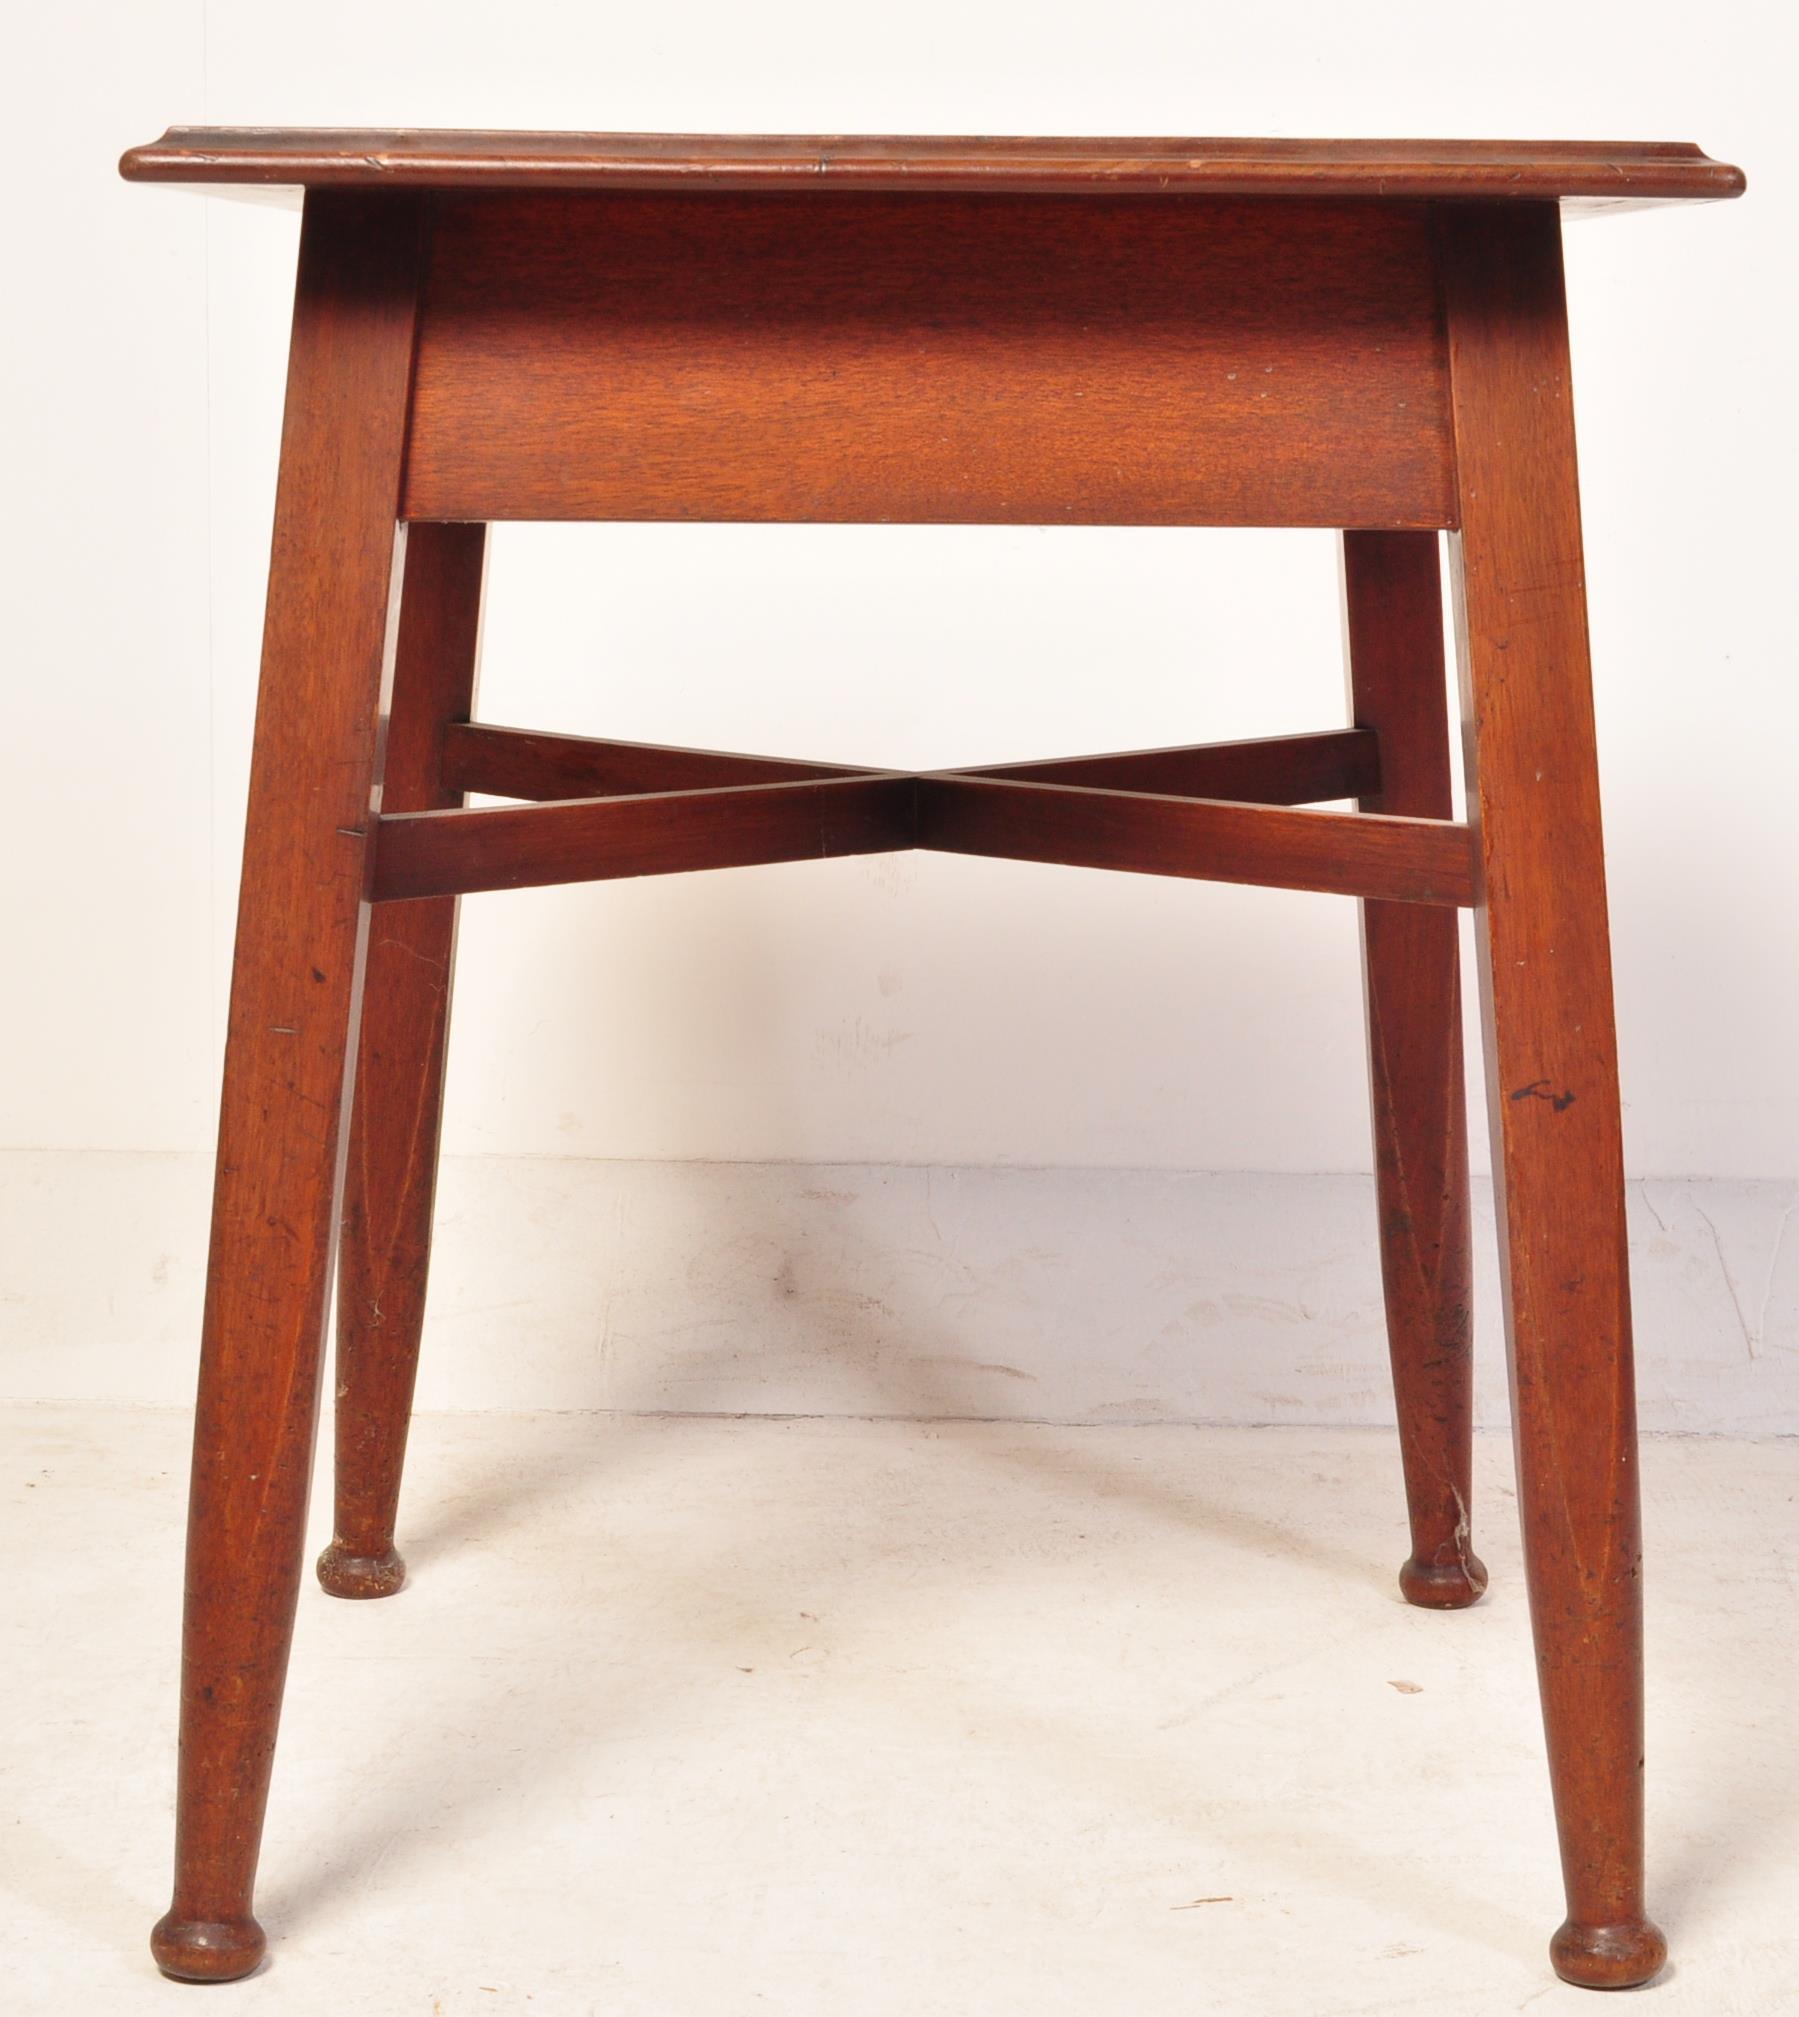 19TH CENTURY VICTORIAN ARTS AND CRAFTS OAK TAVERN TABLE